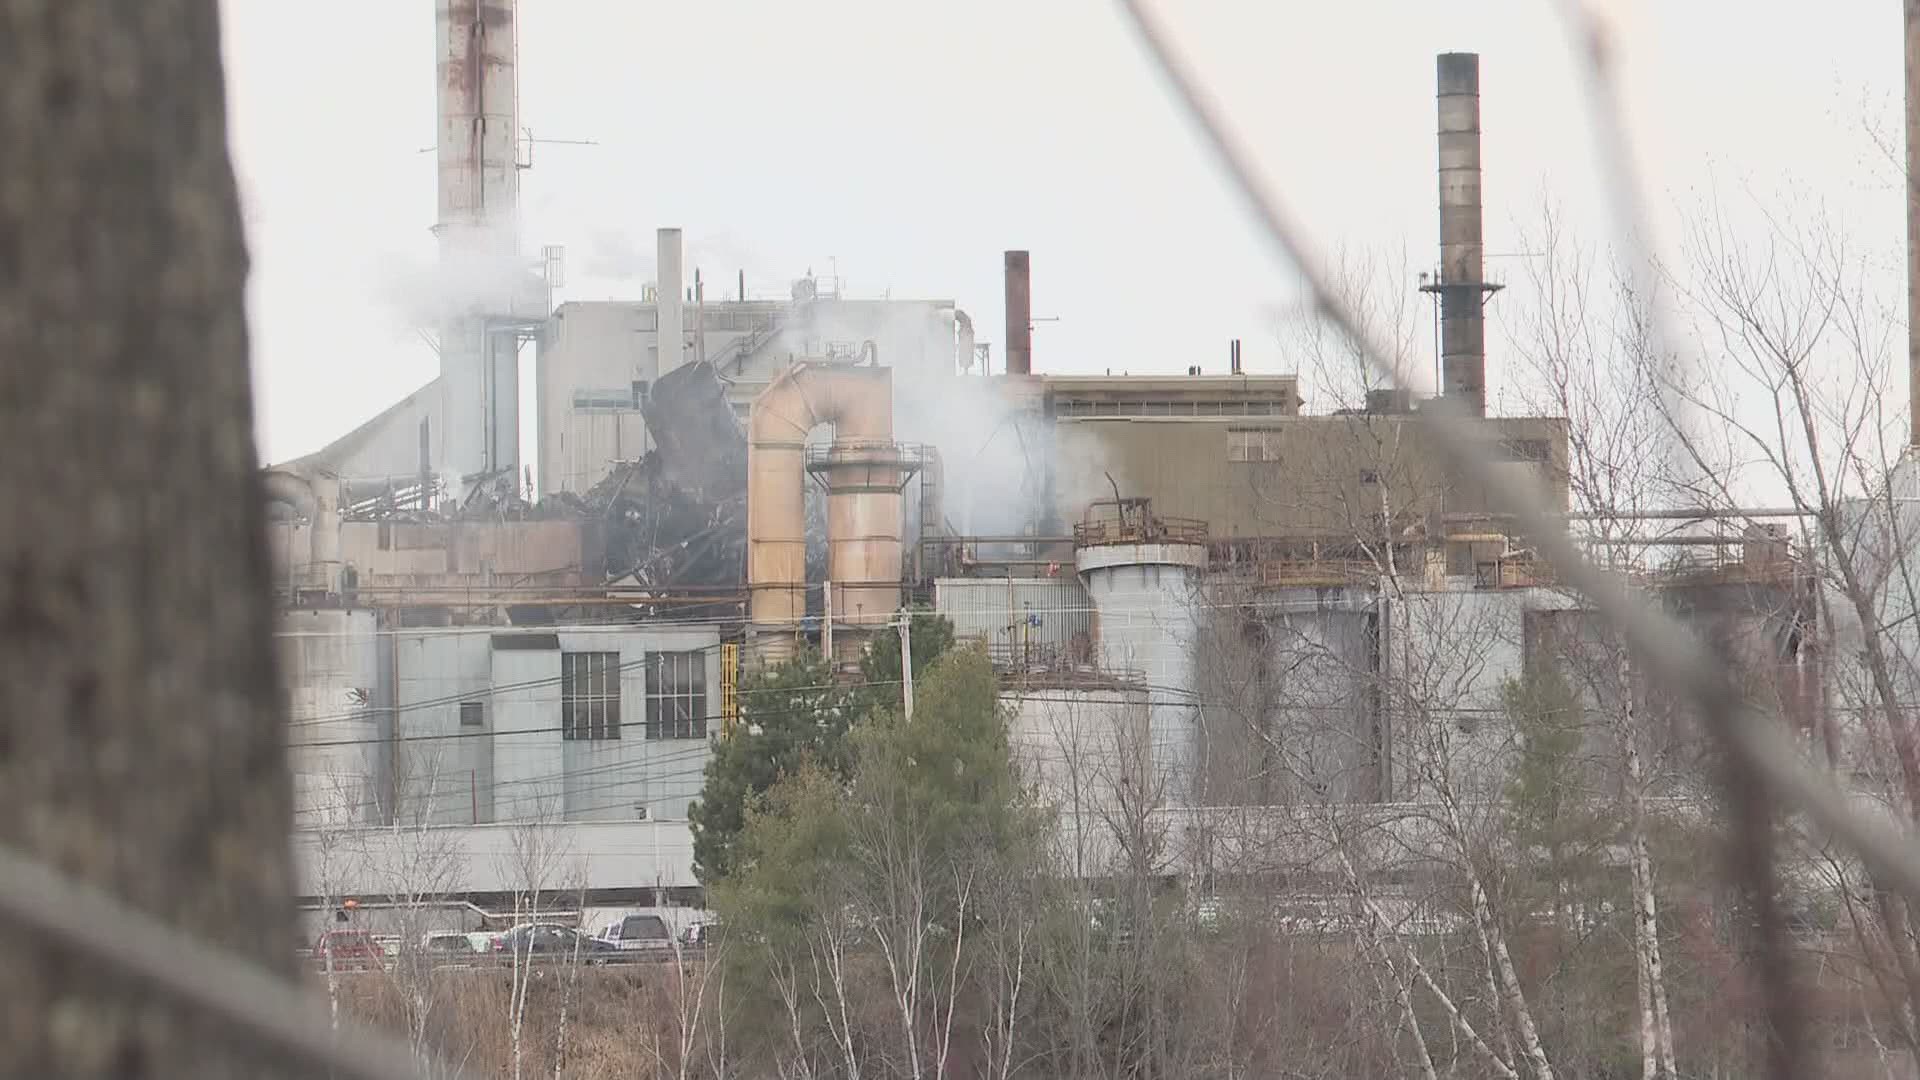 Jay mill partially up and running after explosion